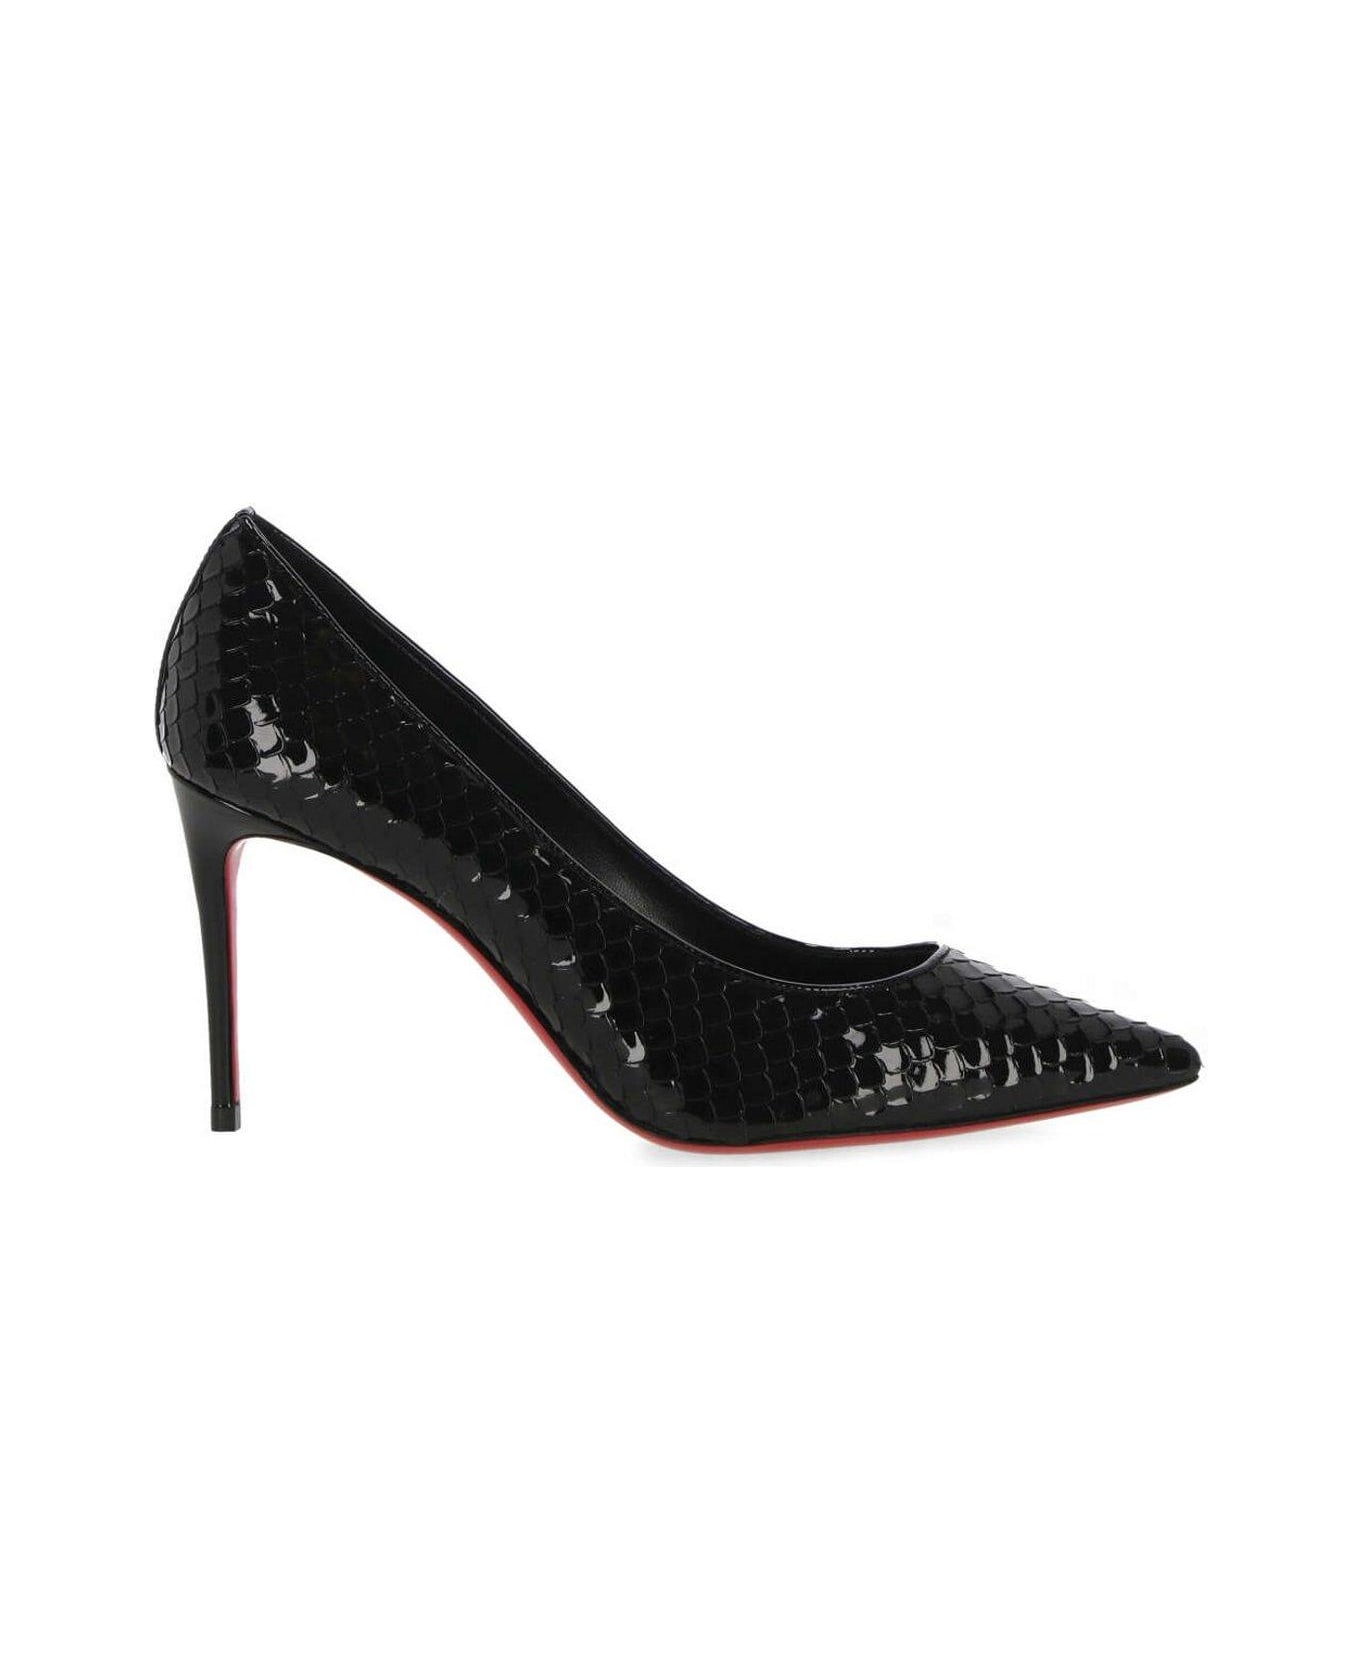 Christian Louboutin Embossed Pointed-toe Pumps